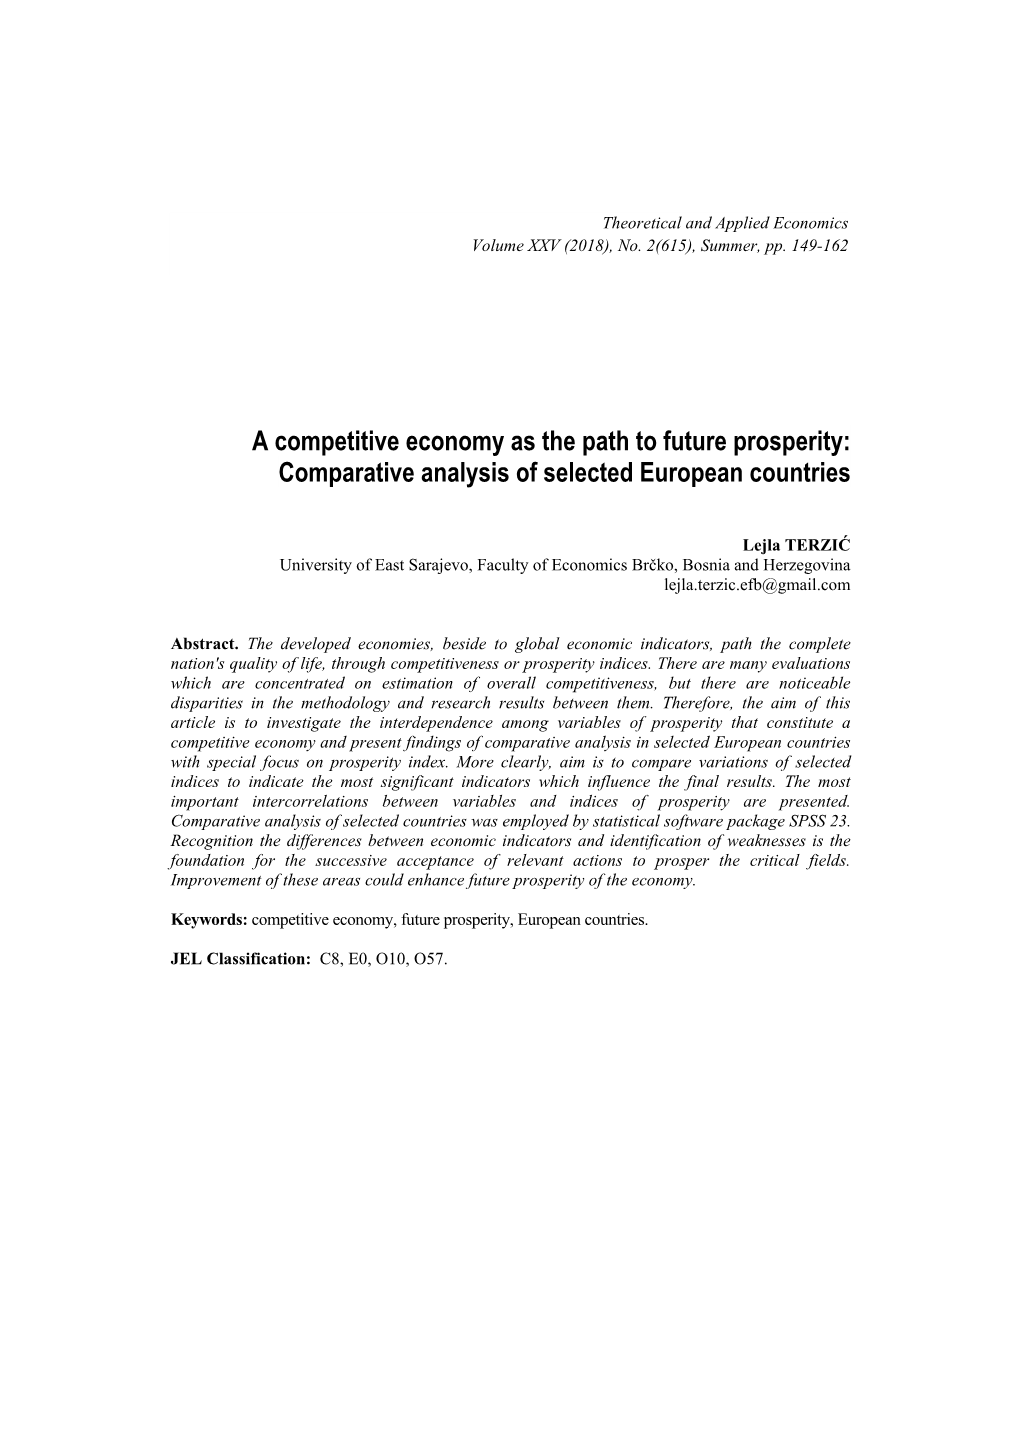 A Competitive Economy As the Path to Future Prosperity: Comparative Analysis of Selected European Countries